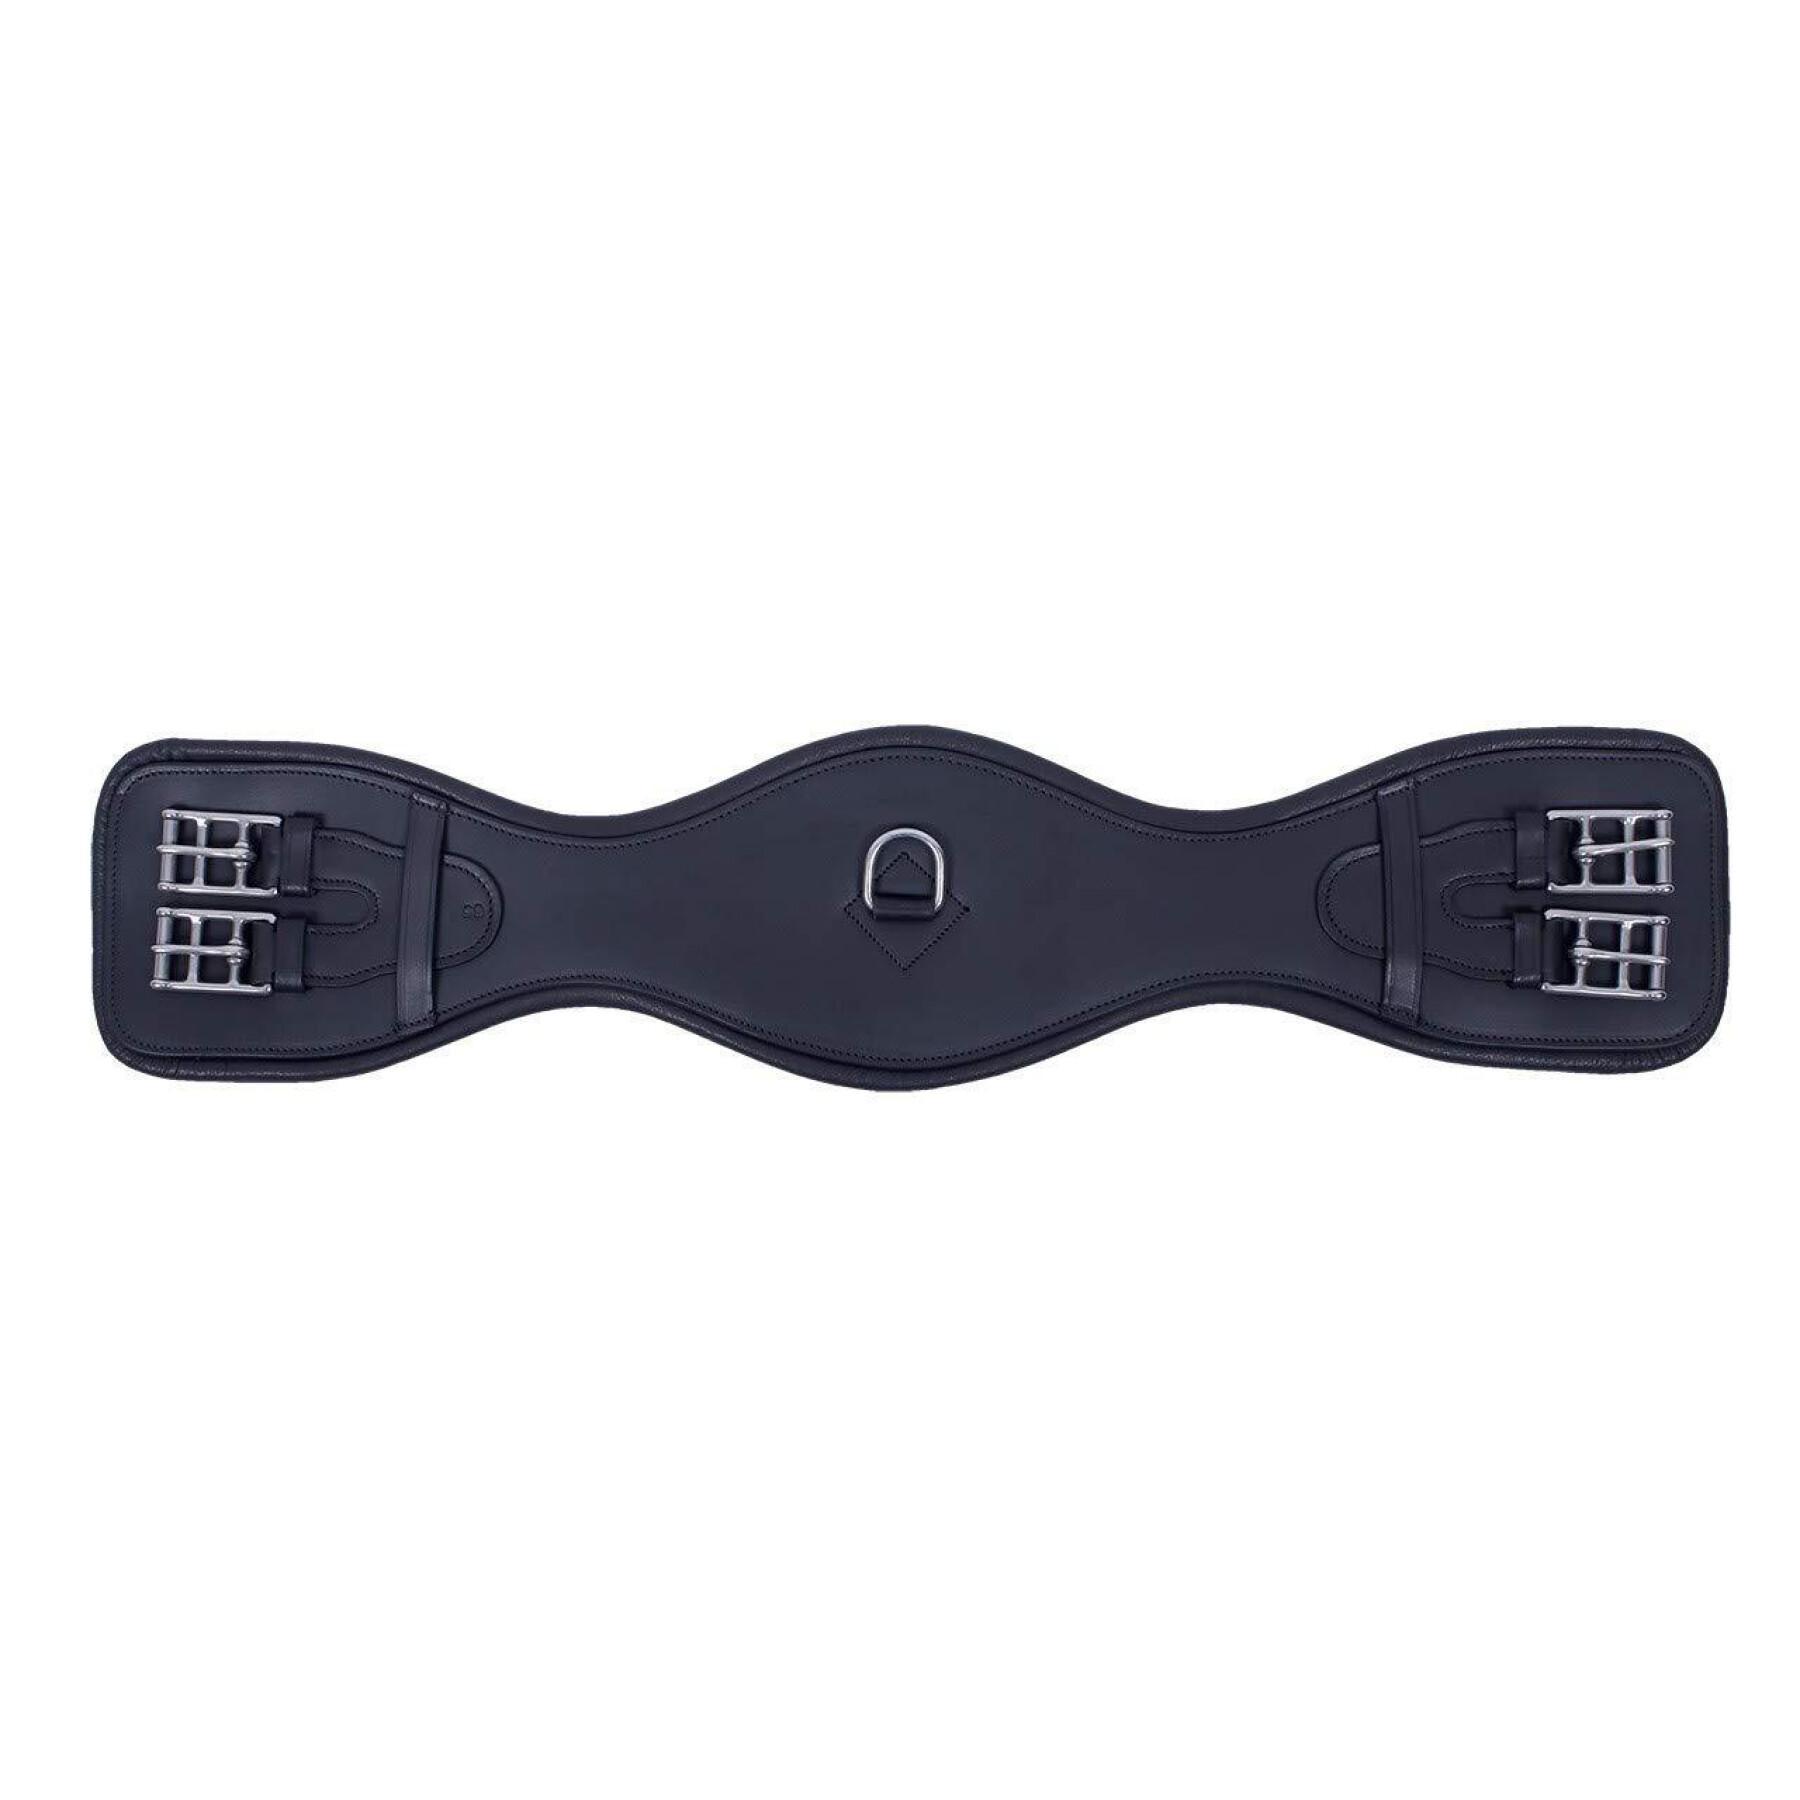 Dressage girth for horses QHP Anatomical